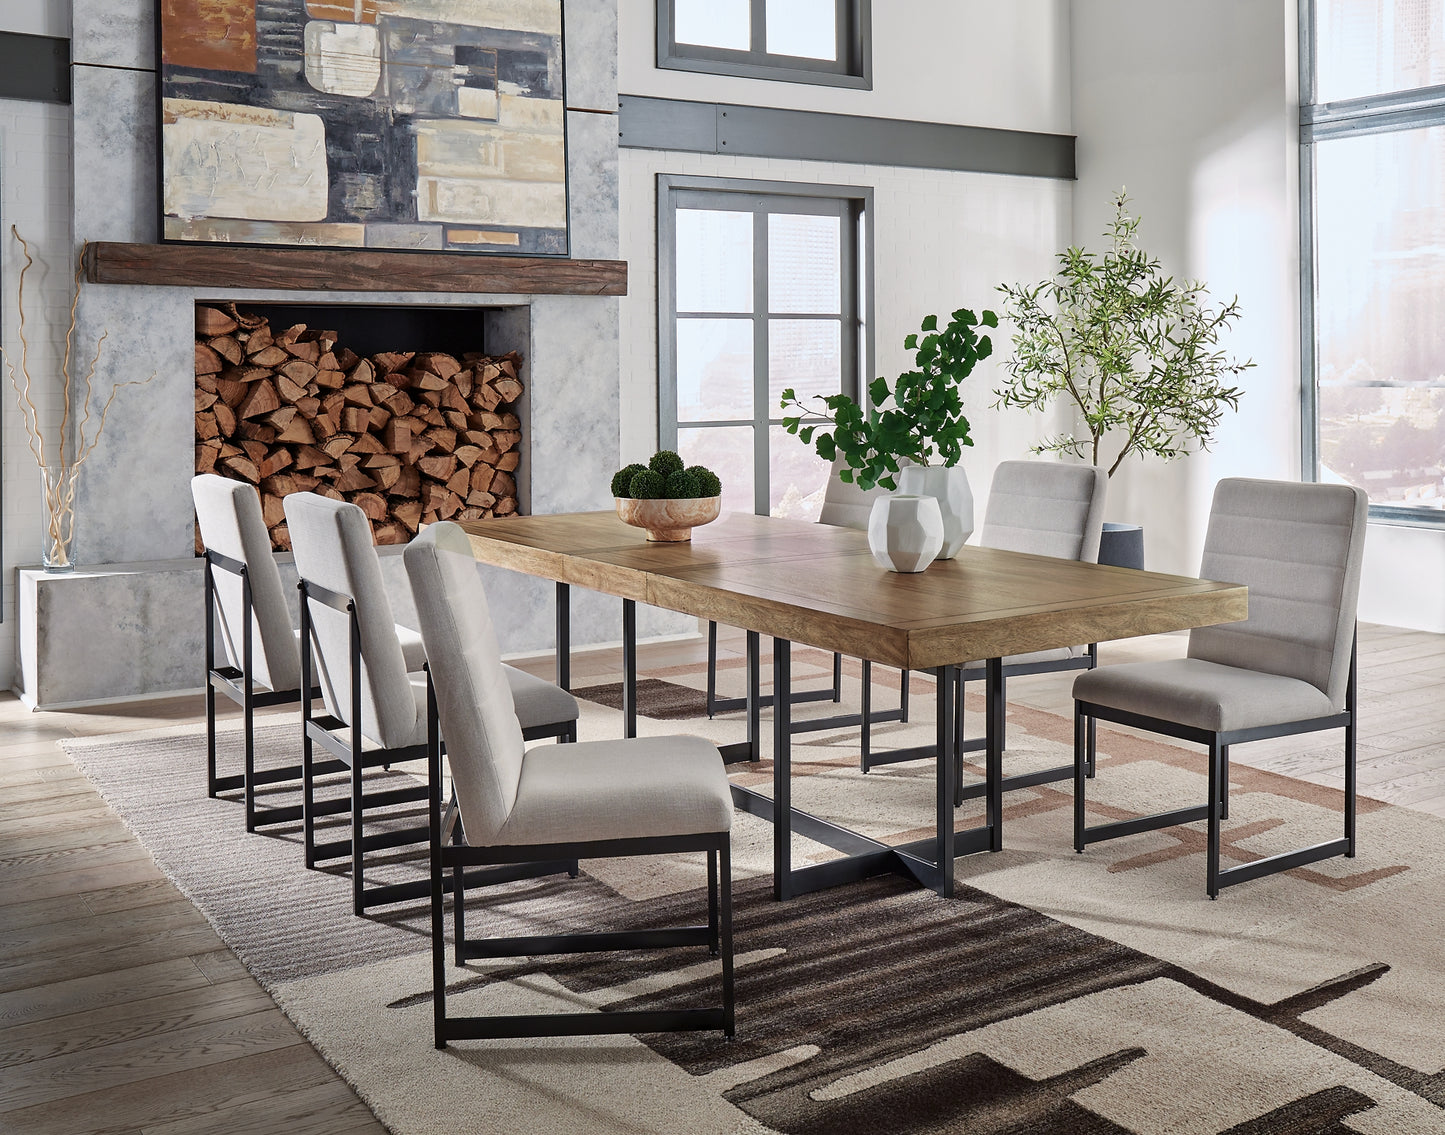 Tomtyn Dining Table and 6 Chairs